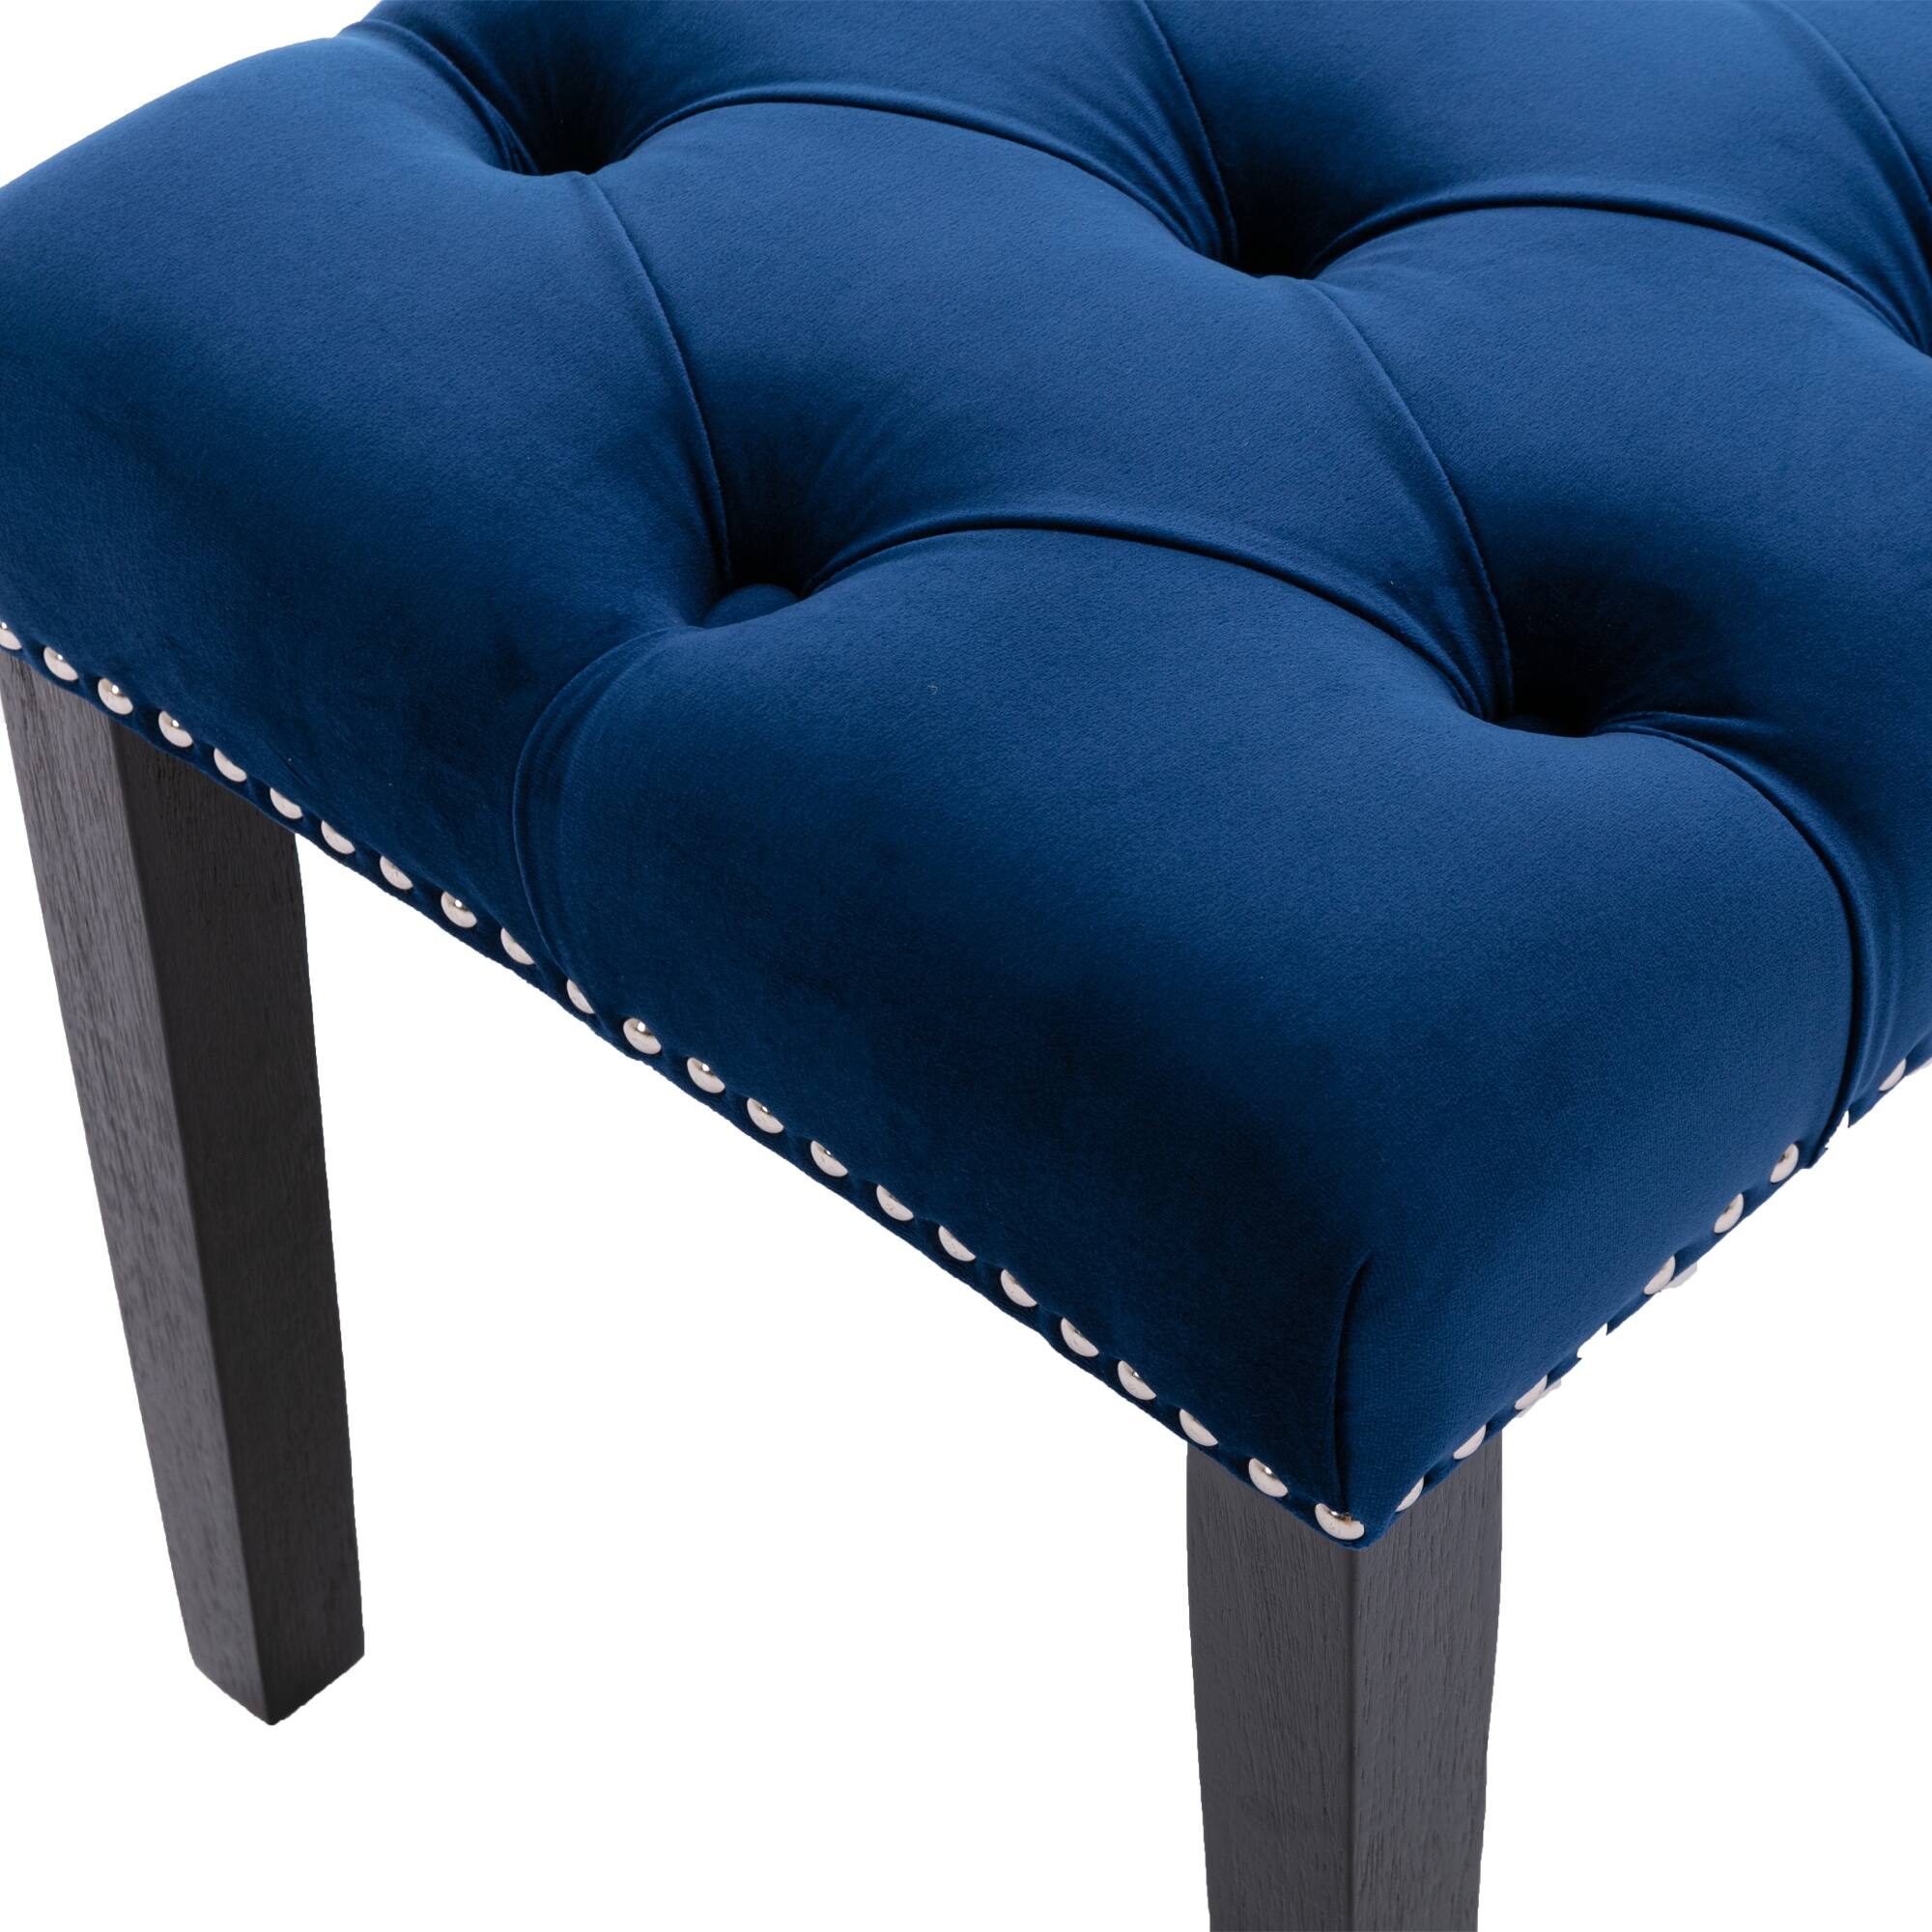 Upholstered Tufted Bench for Entryway